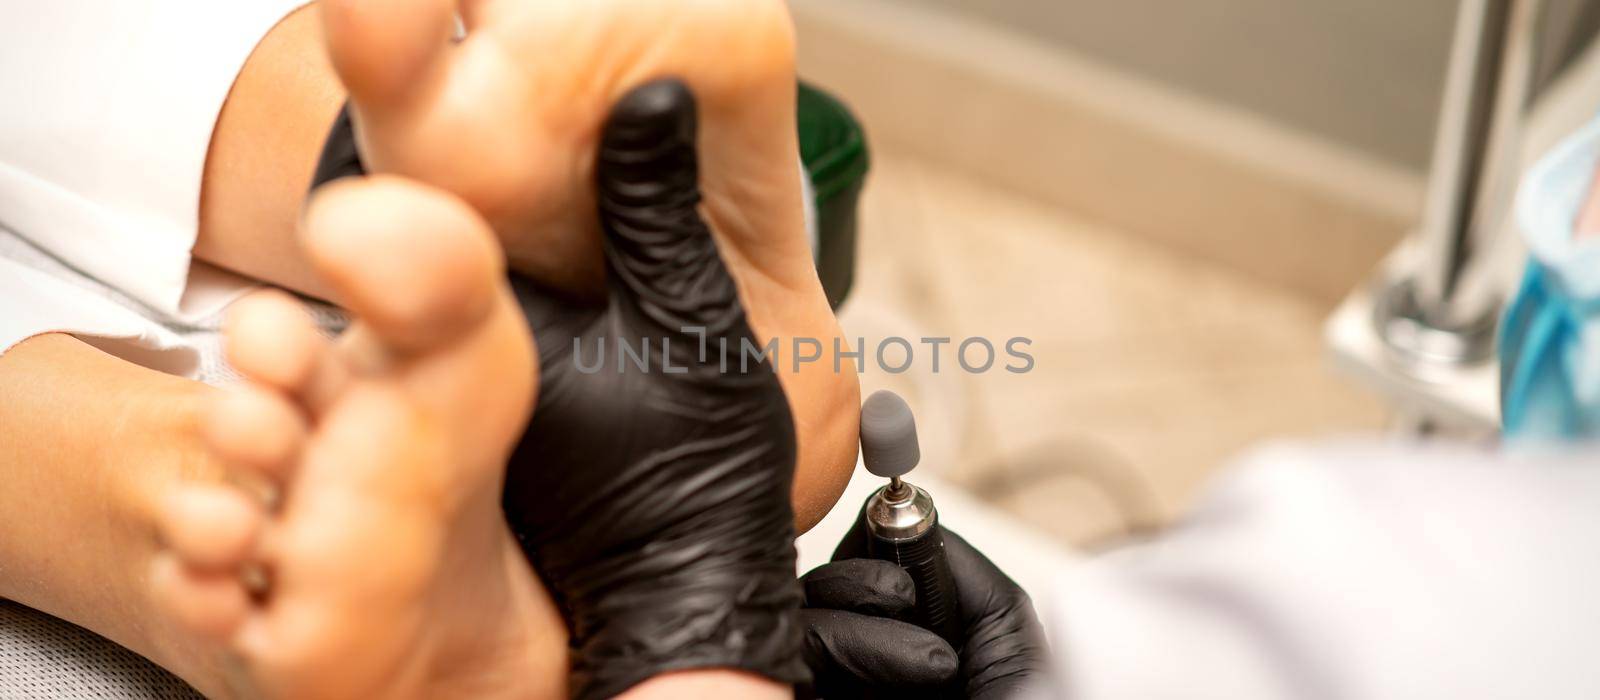 Podiatrist wearing black protective gloves cleaning the skin of foot from callus and corn with the professional electric tool